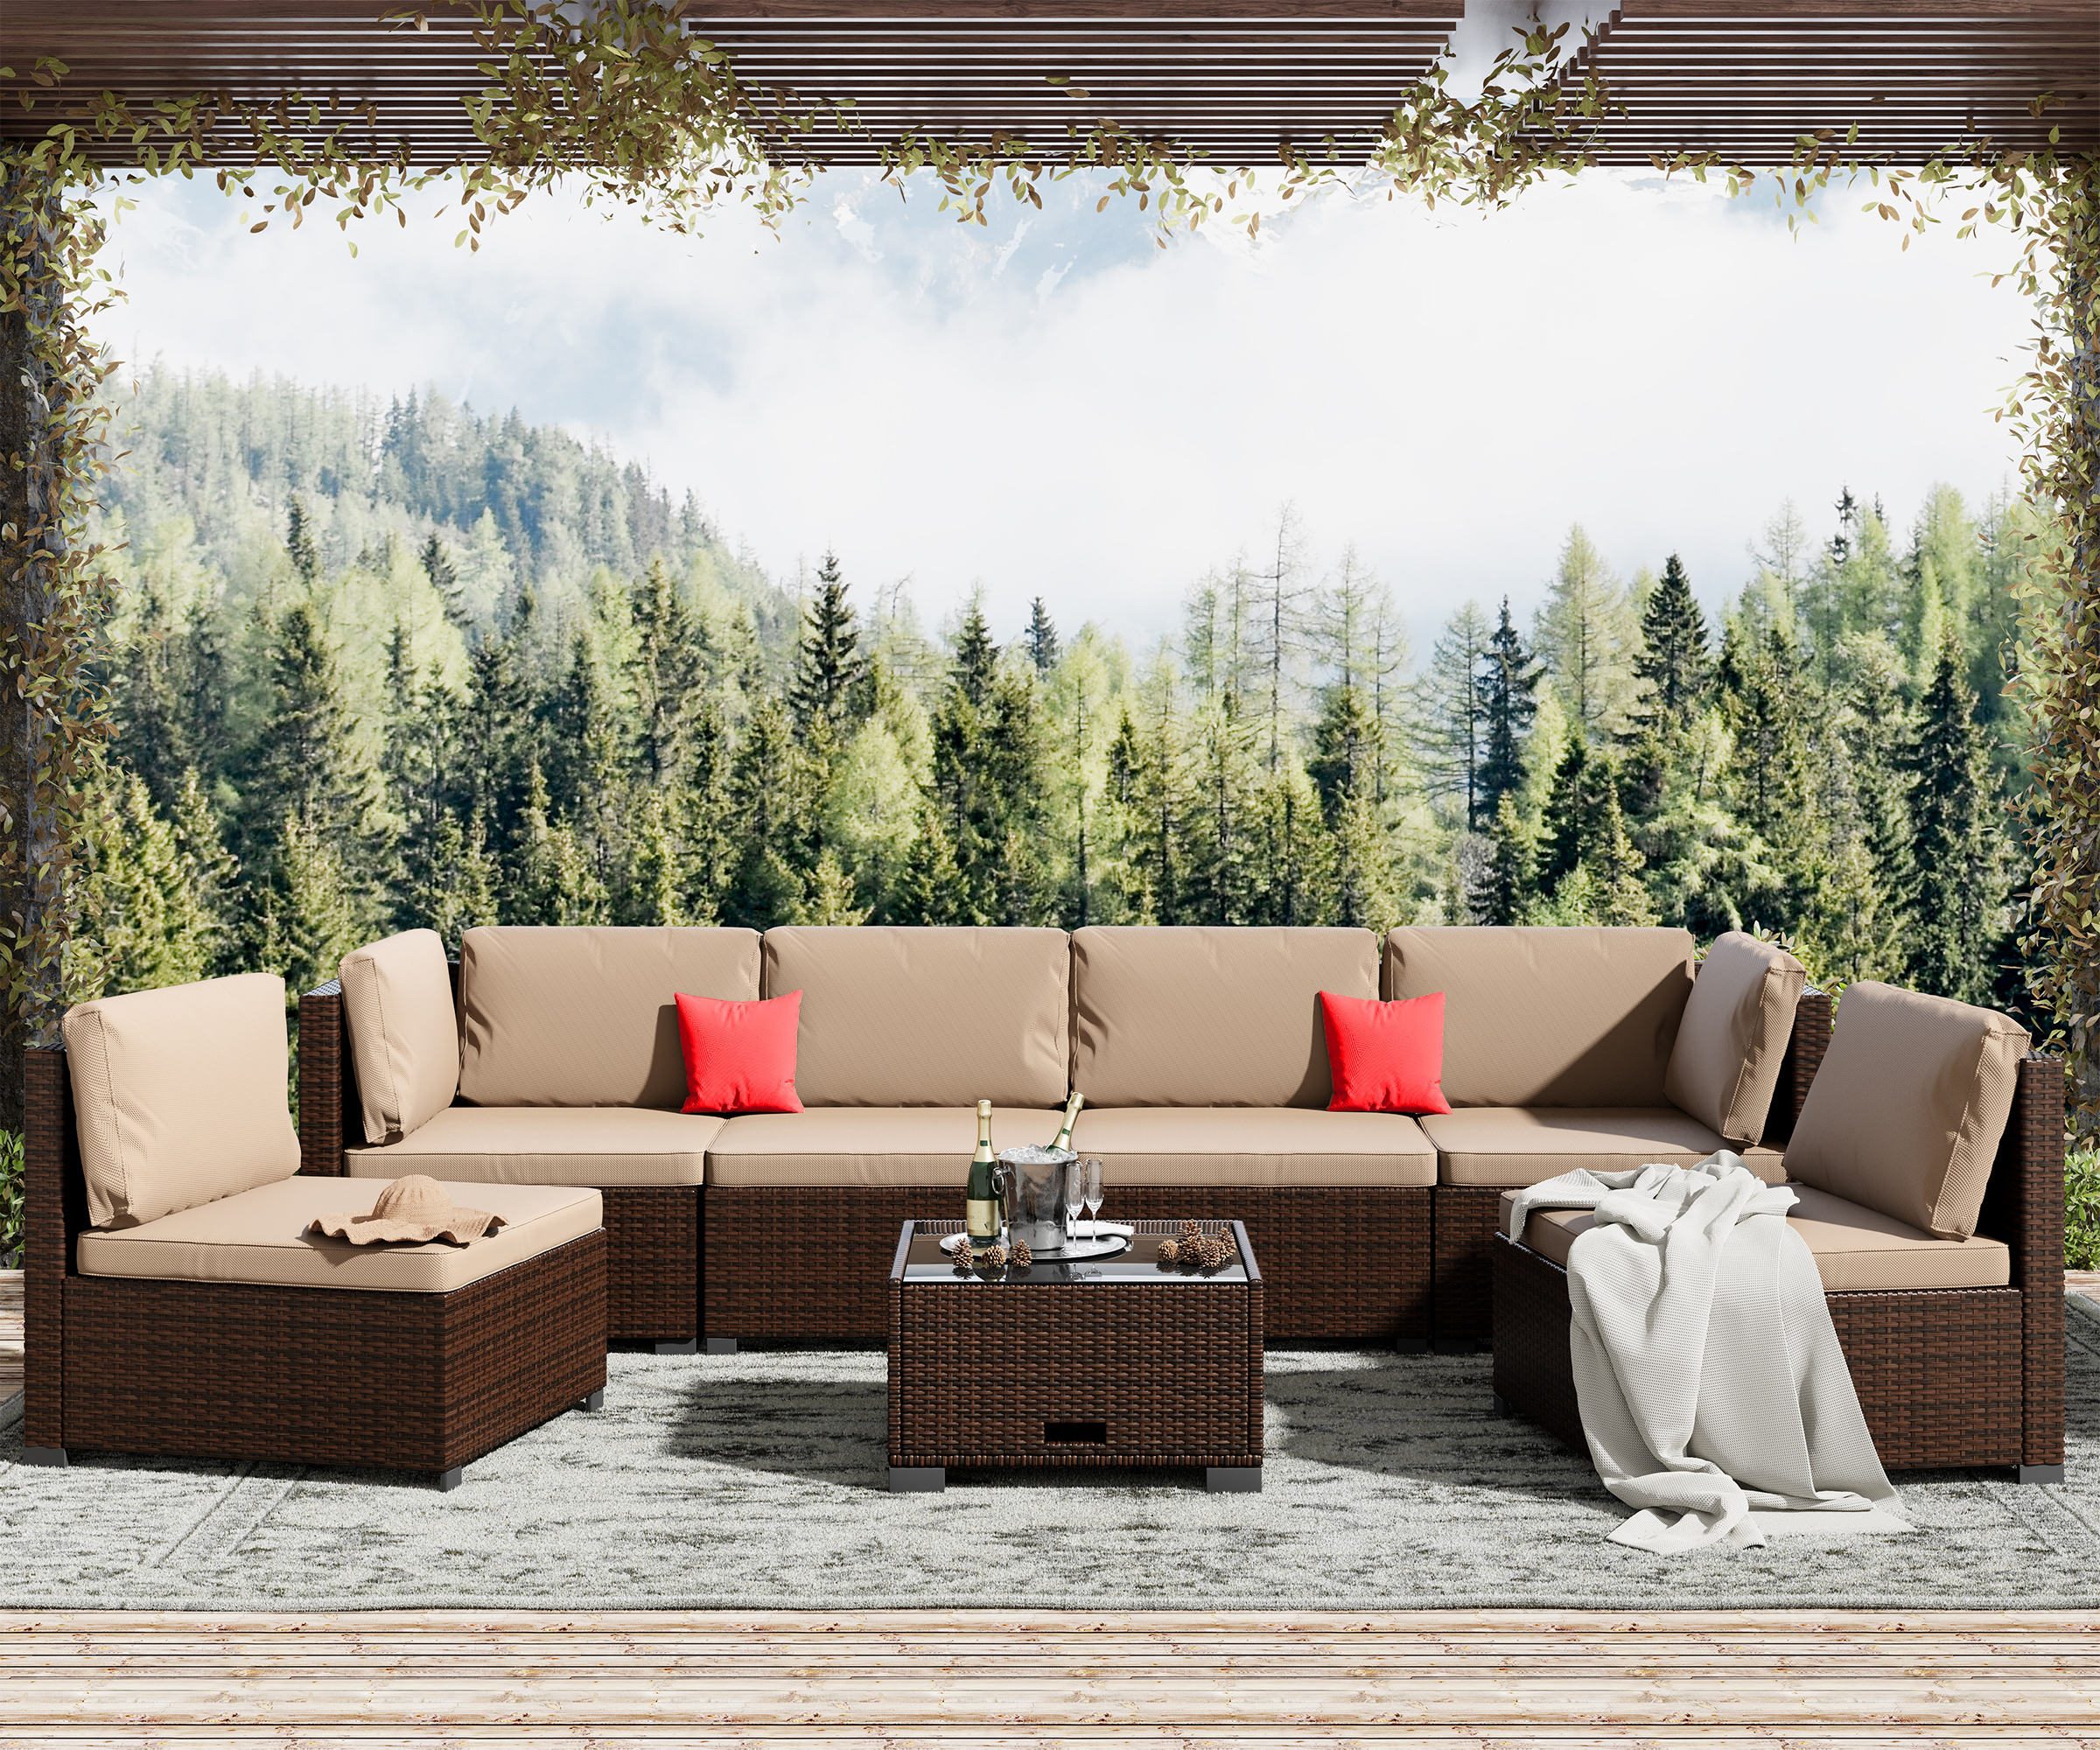 7 Piece Patio Furniture Set, Outdoor Furniture Patio Sectional Sofa, All Weather PE Rattan Outdoor Sectional with Cushion and Coffee Table. - image 1 of 6